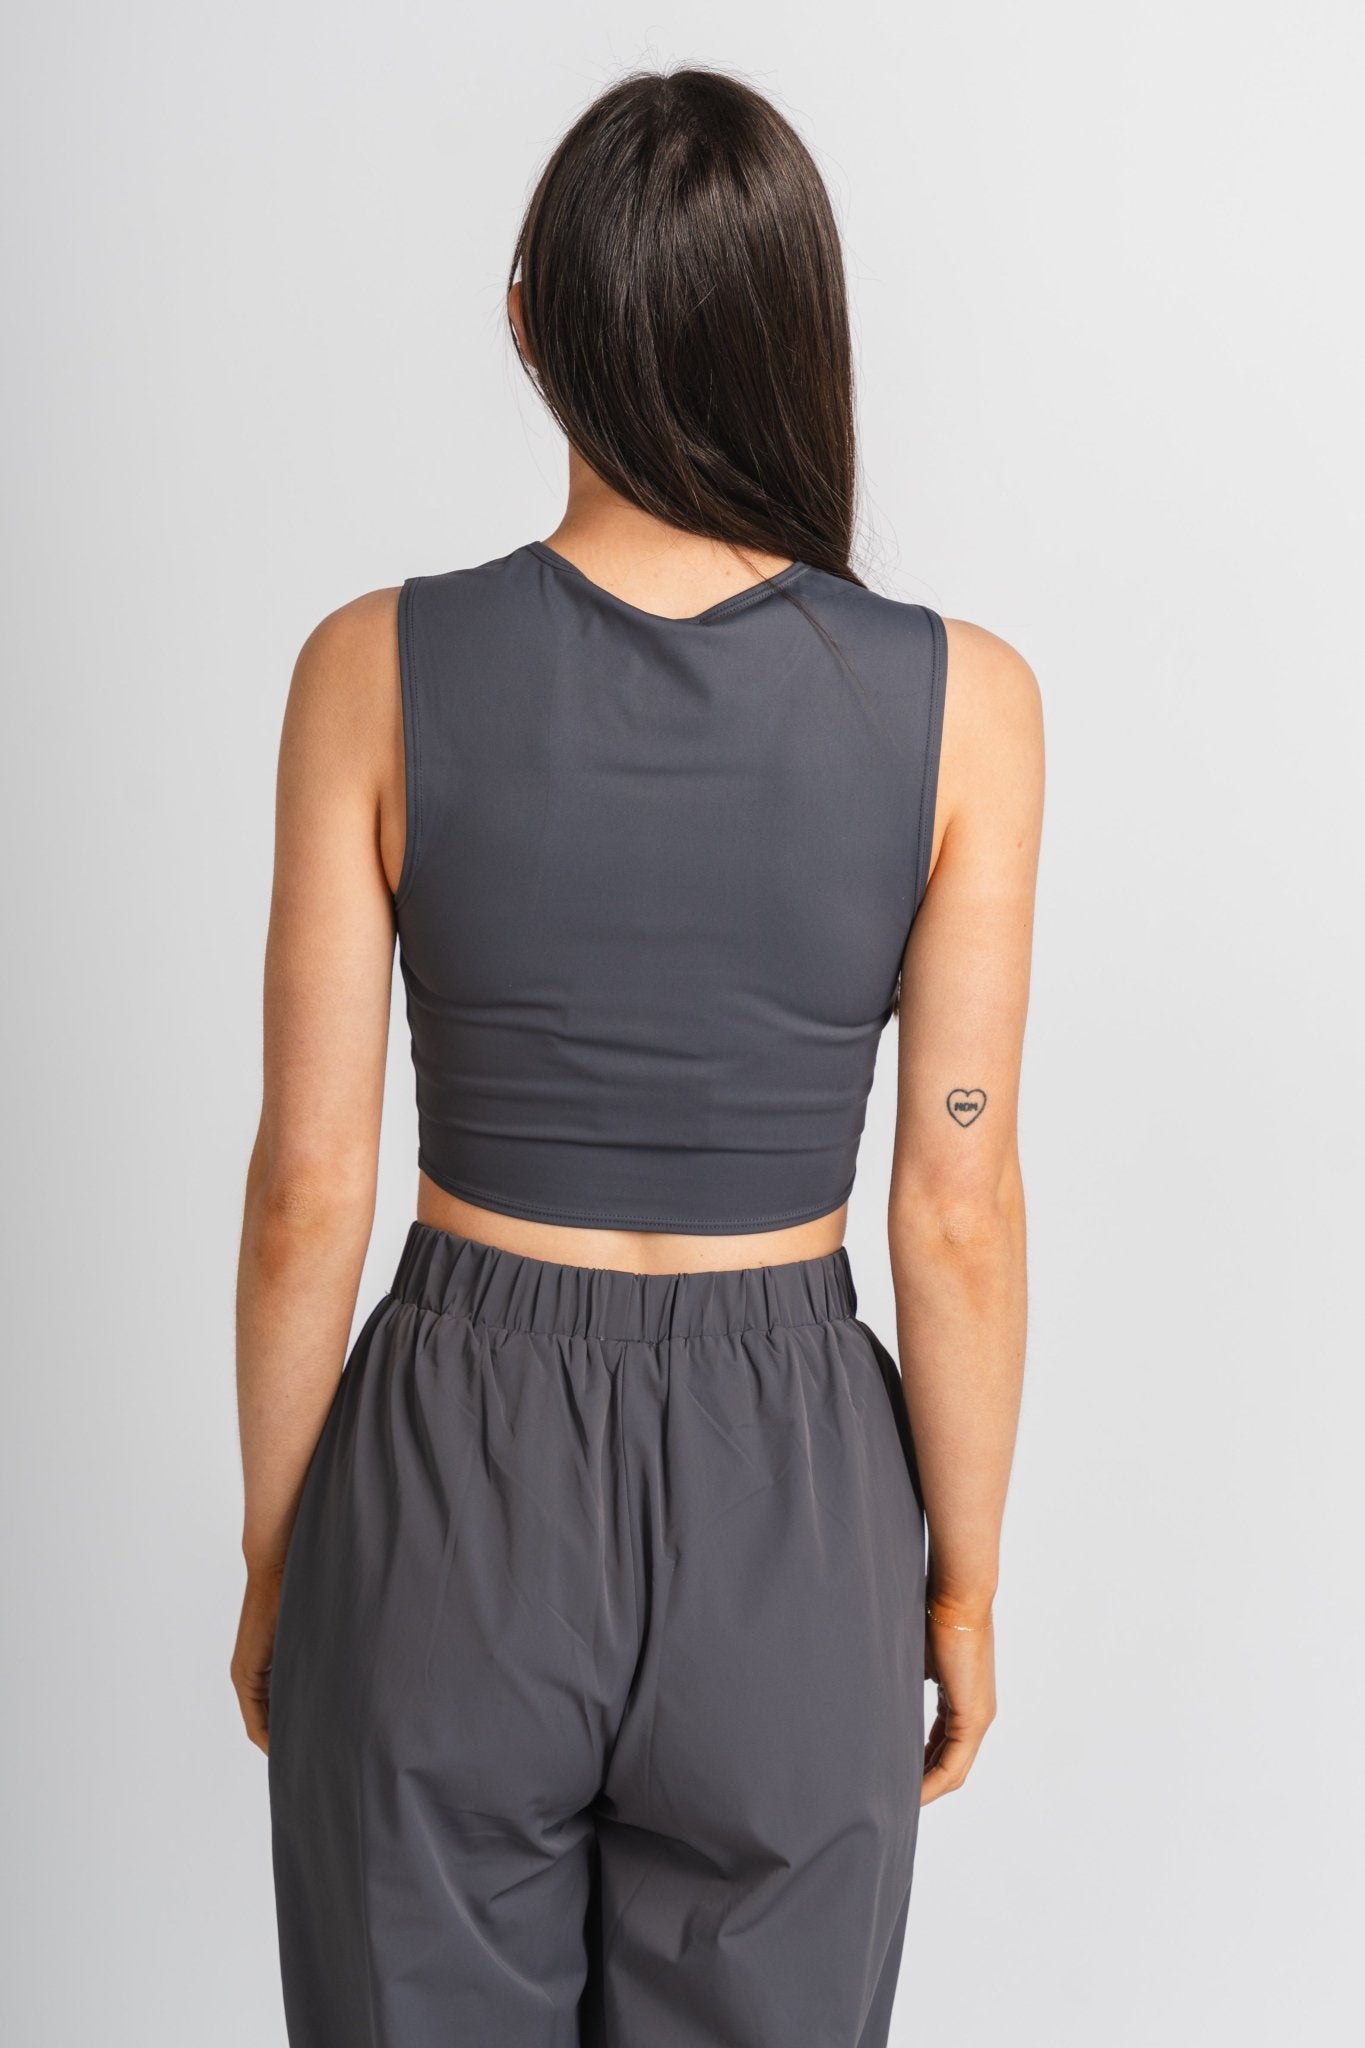 High neck tank top charcoal - Adorable Tank Top - Stylish Comfortable Outfits at Lush Fashion Lounge Boutique in OKC